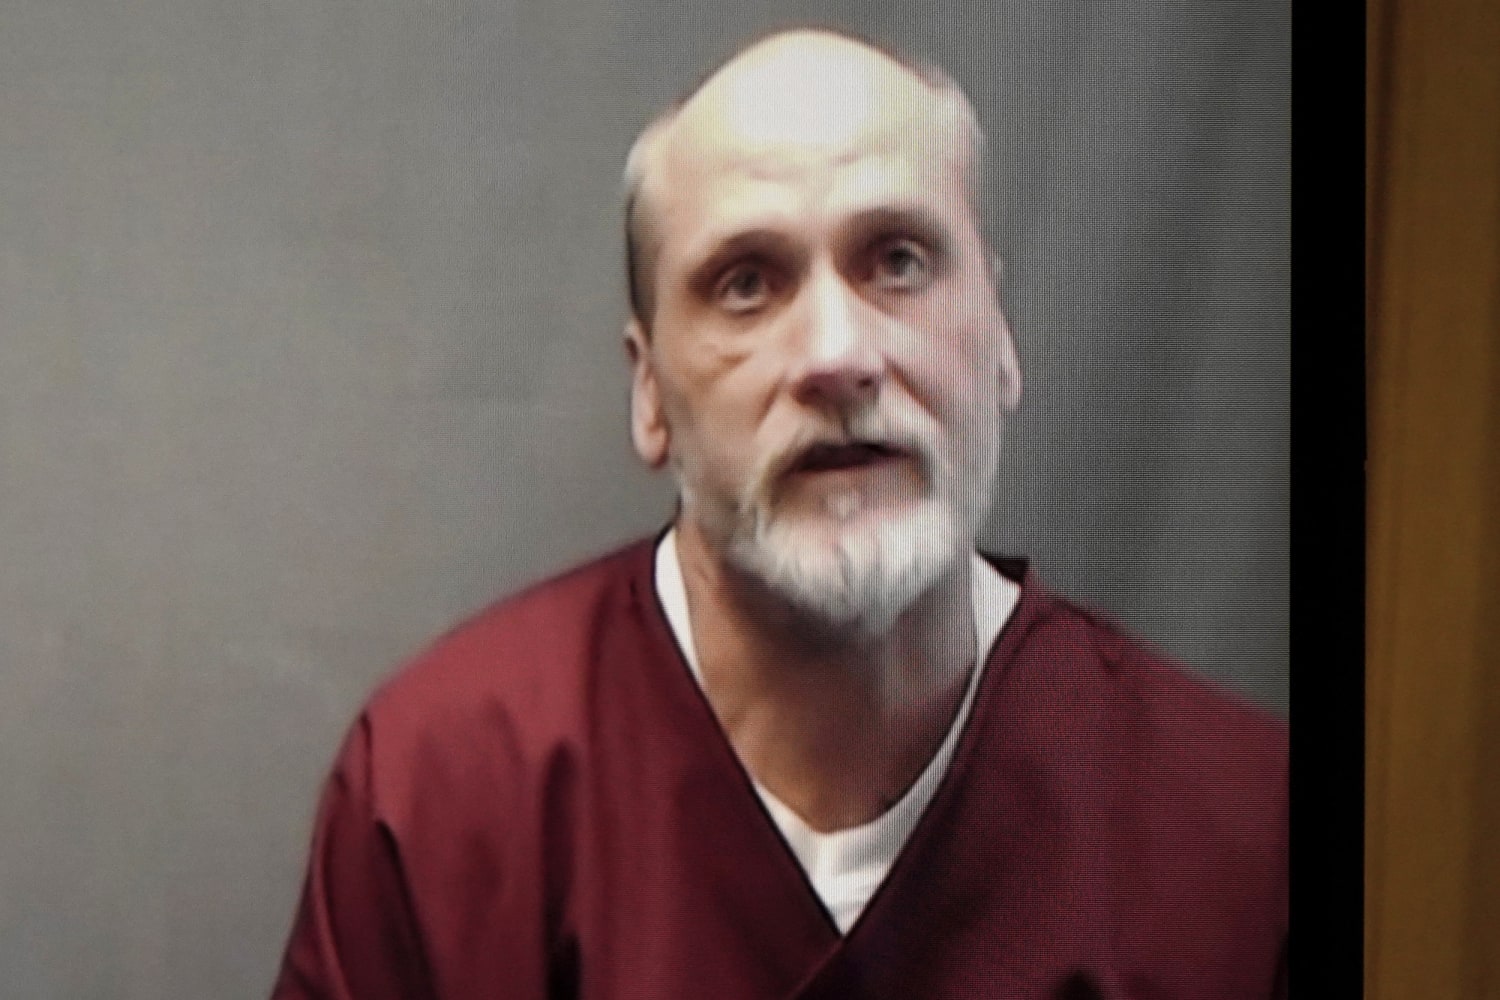 Oklahoma executes a man who killed a 73-year-old man with a hammer